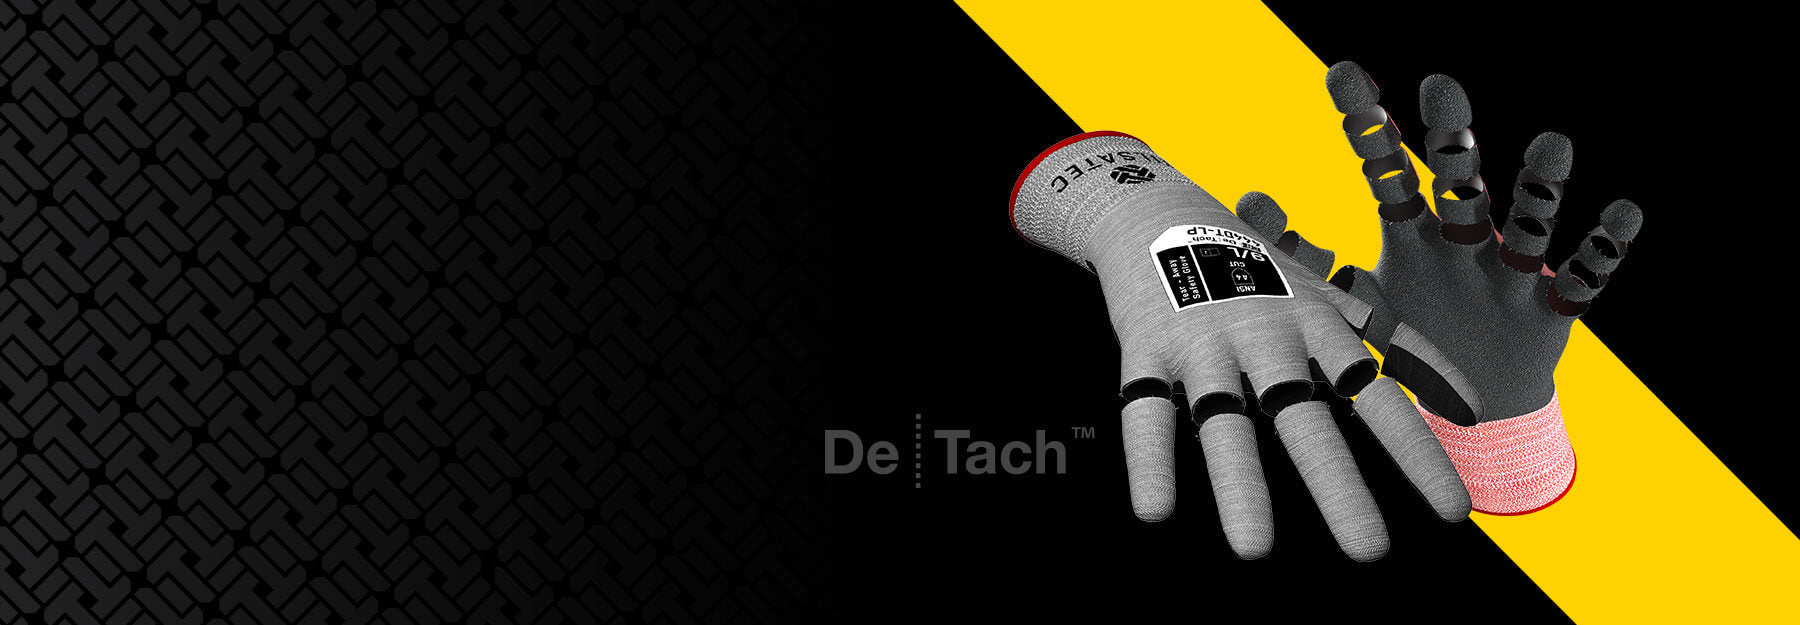 Hand — Tagged Product Family: DeTach™ (tear-away technology) — Tilsatec